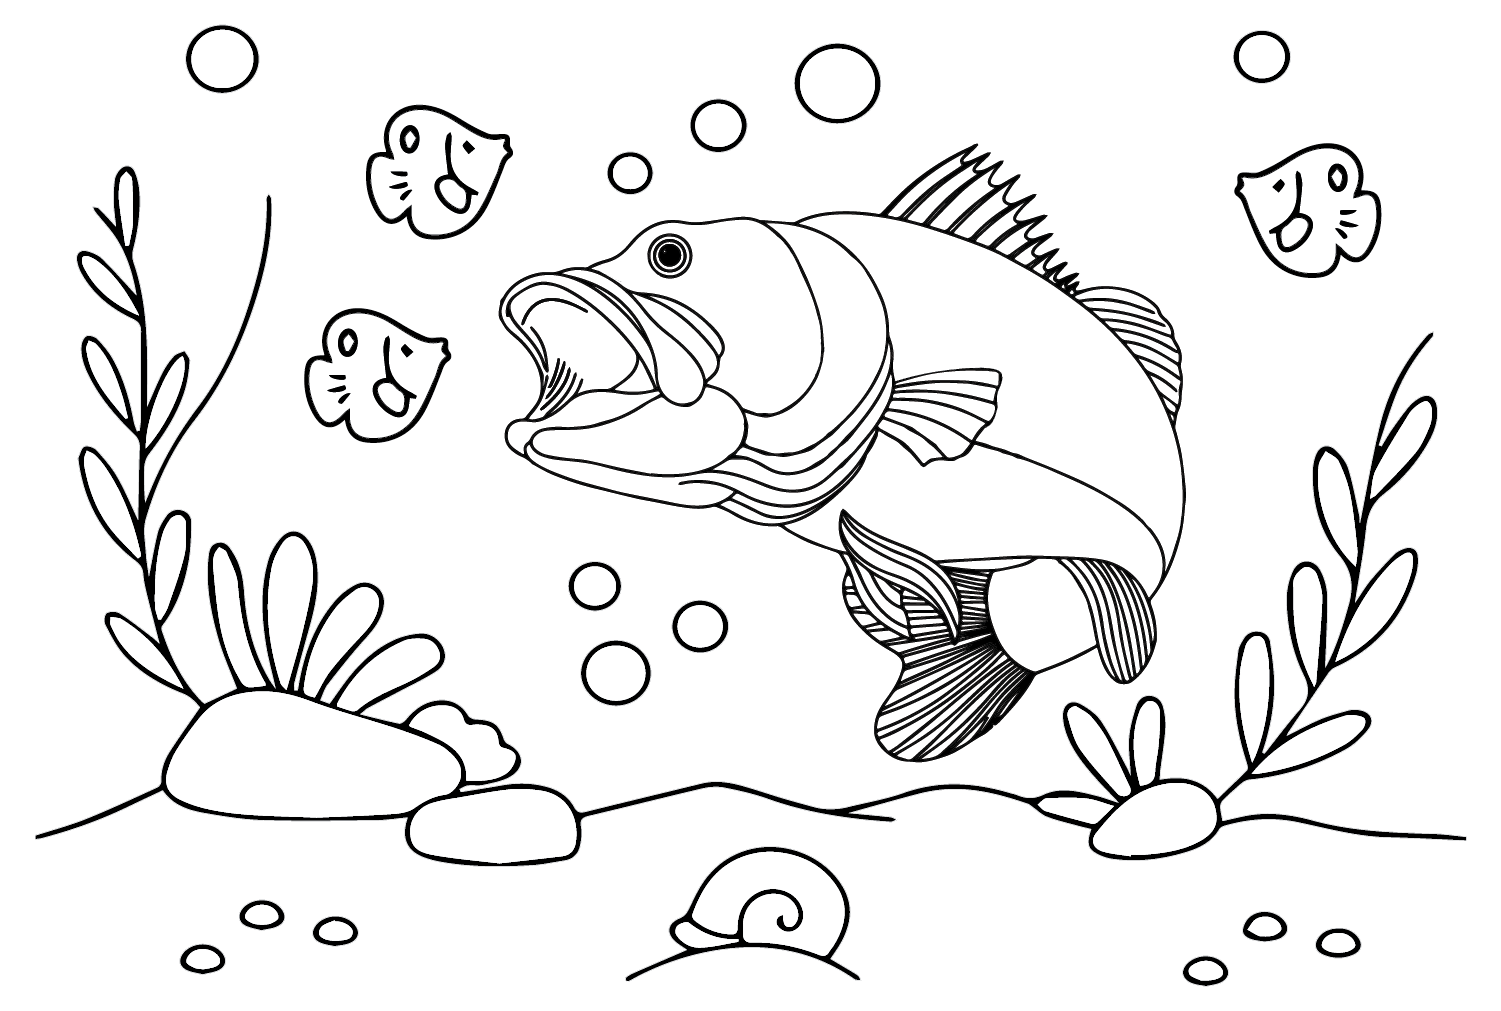 Bass Fish Coloring Pages - Free Printable Coloring Pages